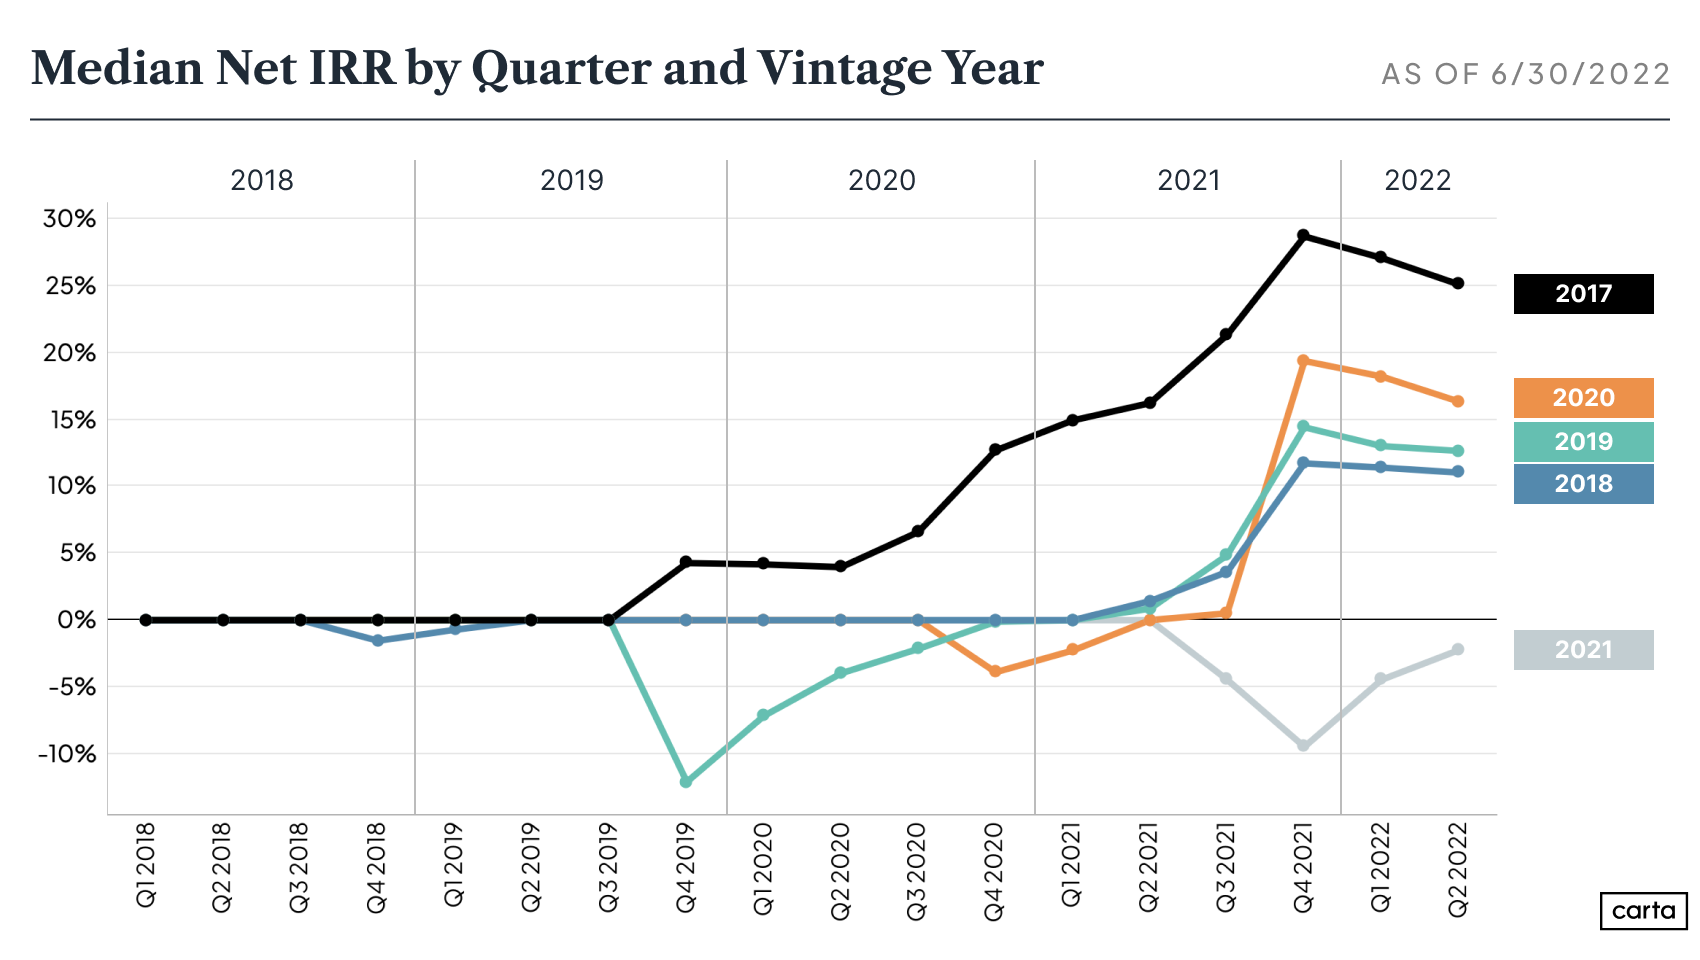 Chart for median Net IRR by quarter and vintage year, showing a decline for most fund vintages in H1 2022.